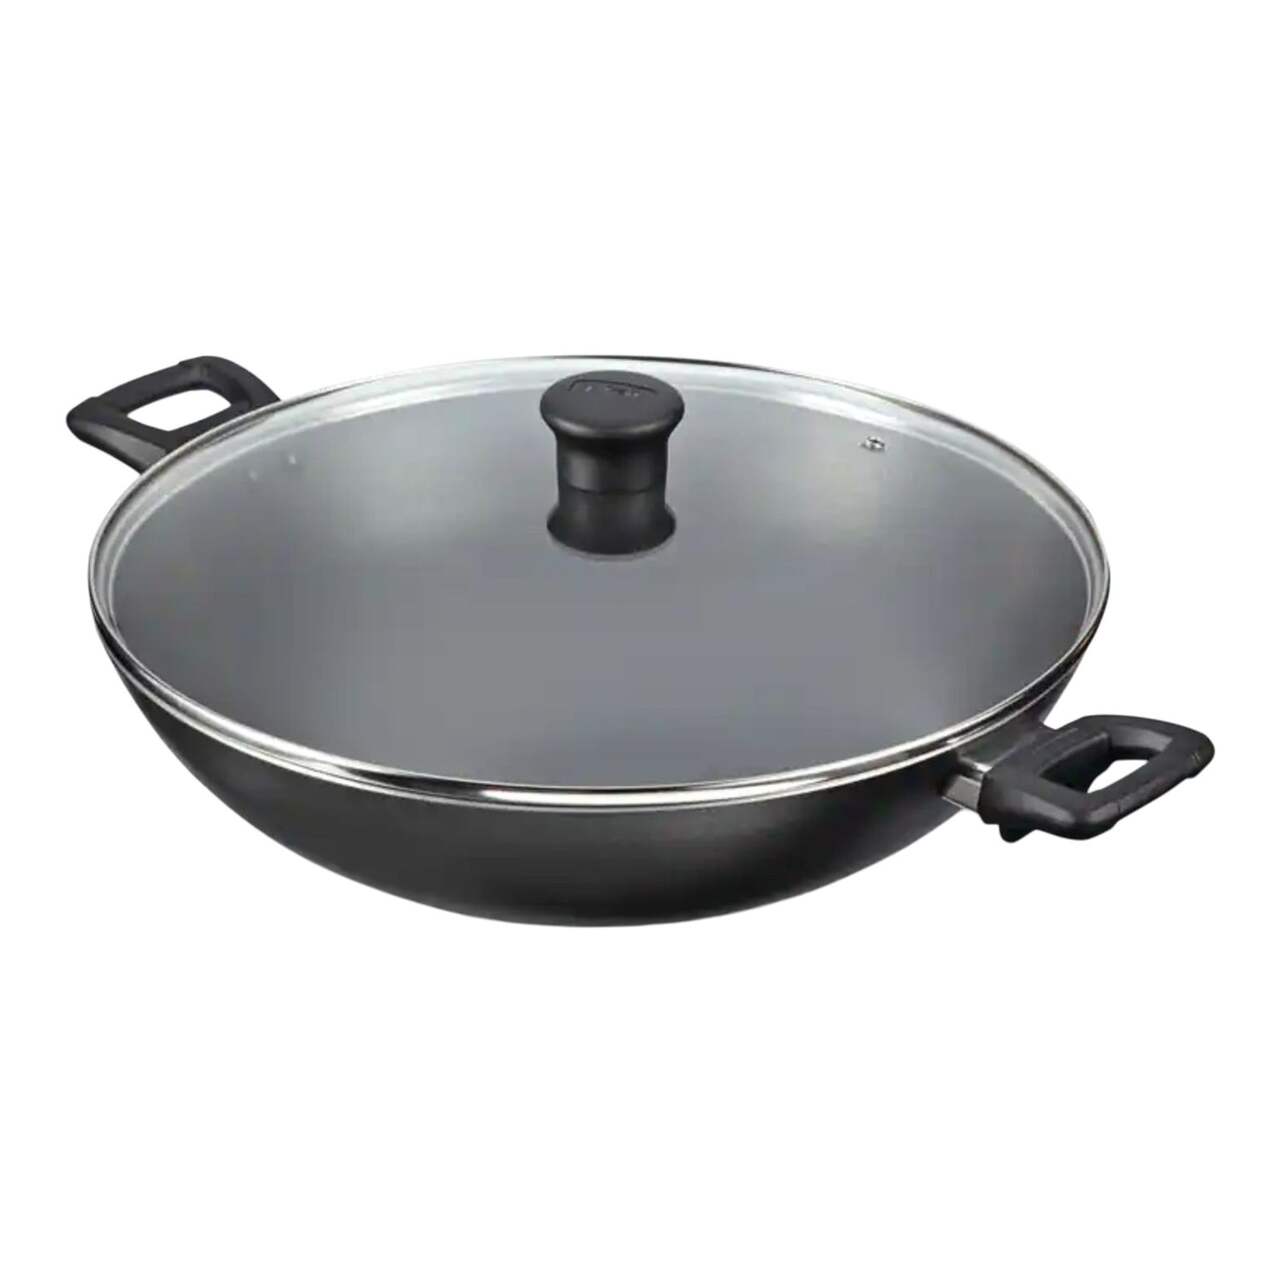 https://media-www.canadiantire.ca/product/living/kitchen/cookware/1425766/t-fal-jumbo-wok-36cm-with-glass-lid-a10ca719-0269-4a74-8c44-9bd6e254d2d6-jpgrendition.jpg?imdensity=1&imwidth=640&impolicy=mZoom